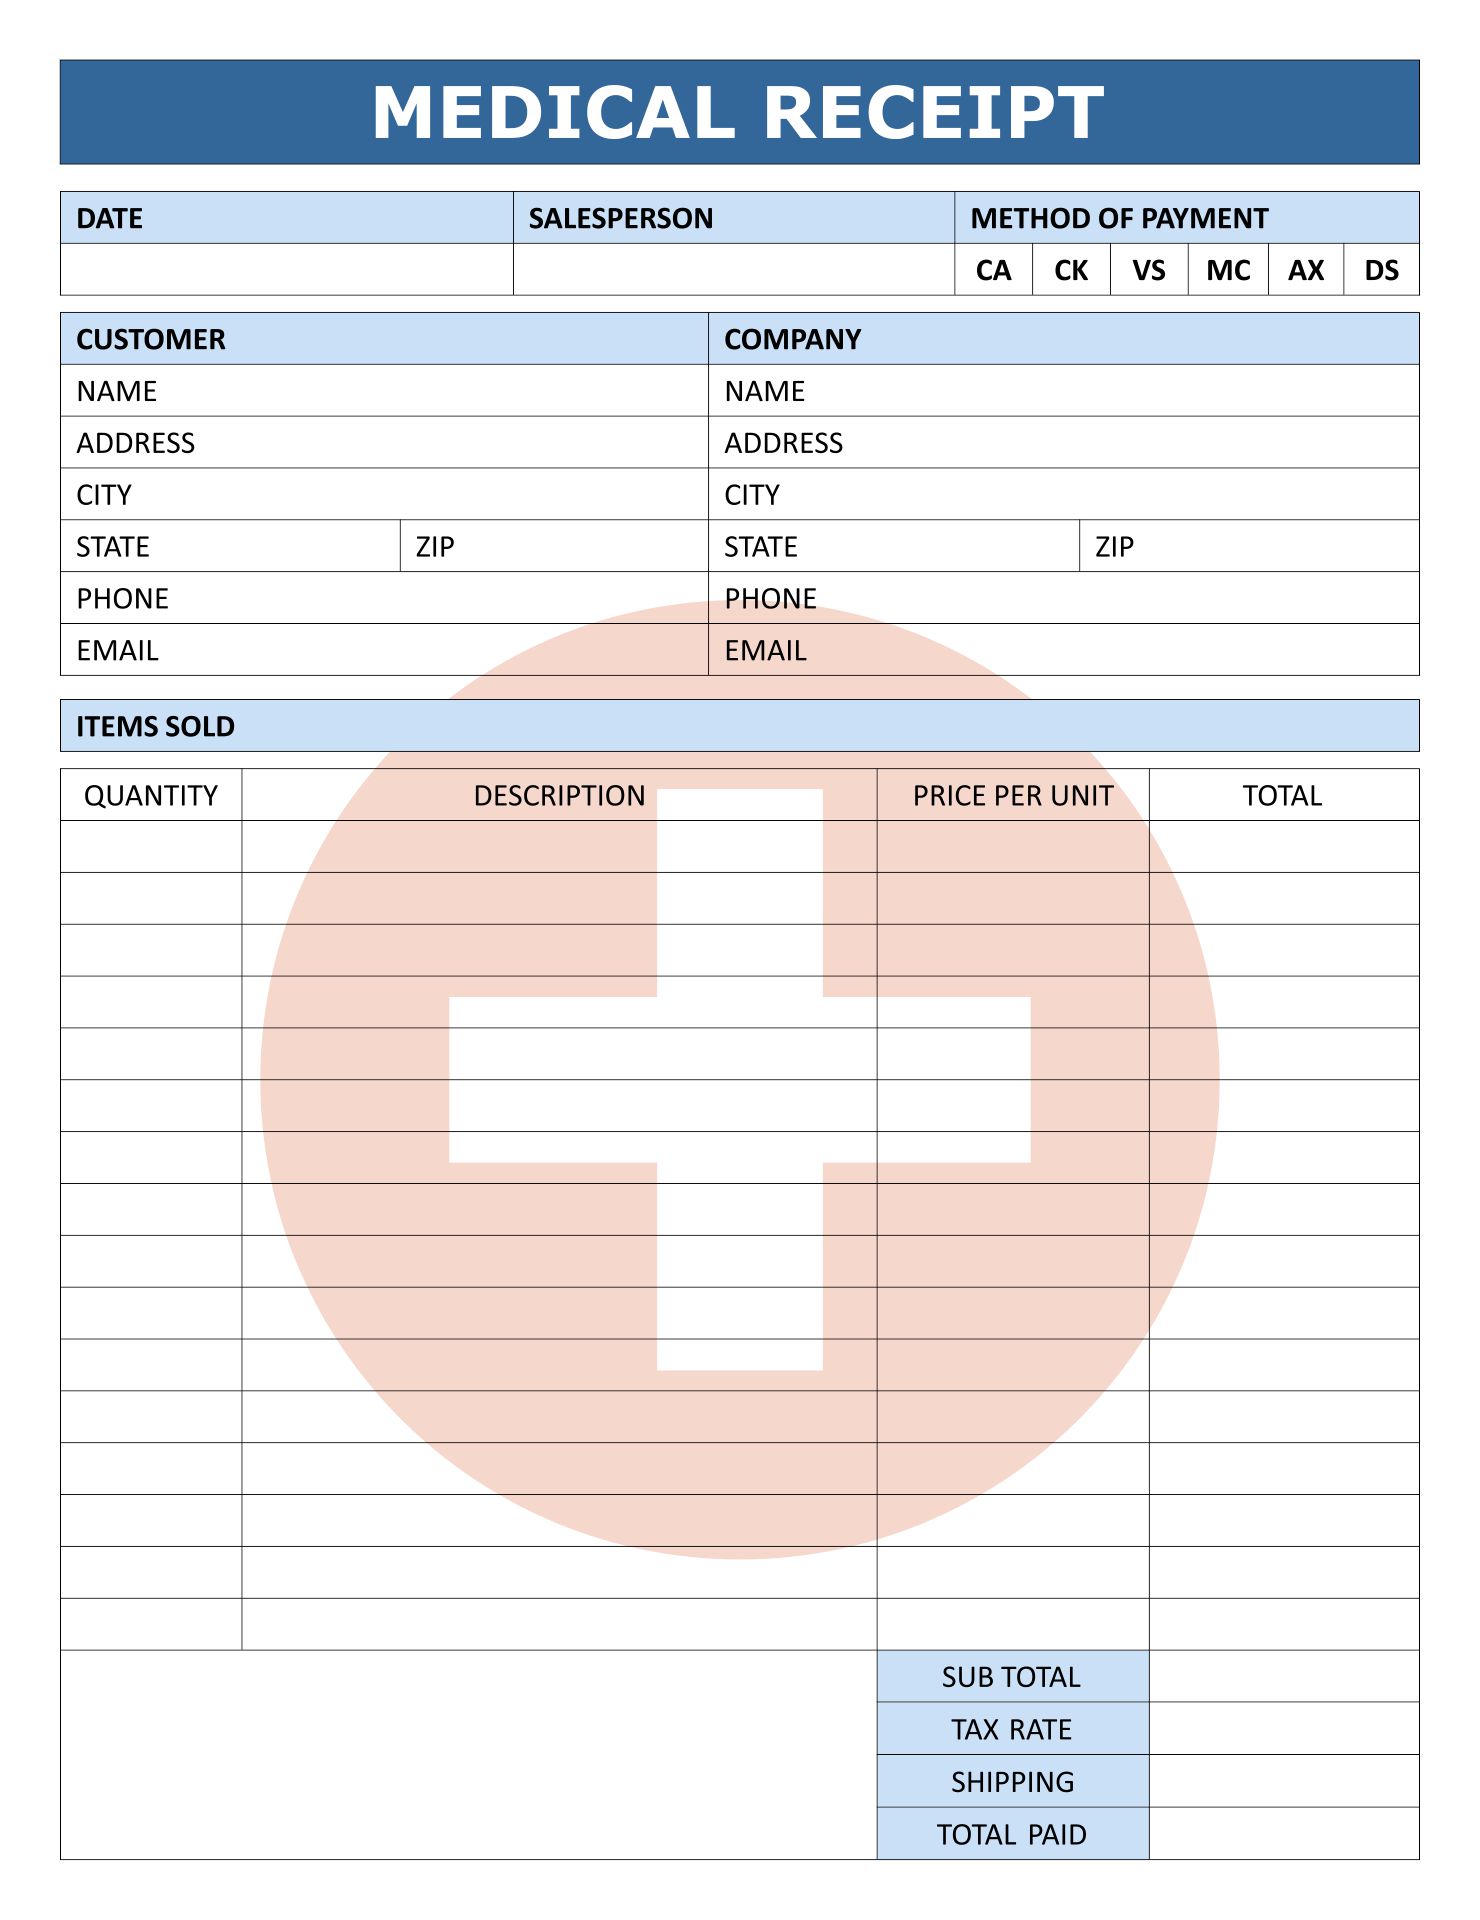 medical-receipt-template-in-printable-format-printable-receipt-template-bank2home